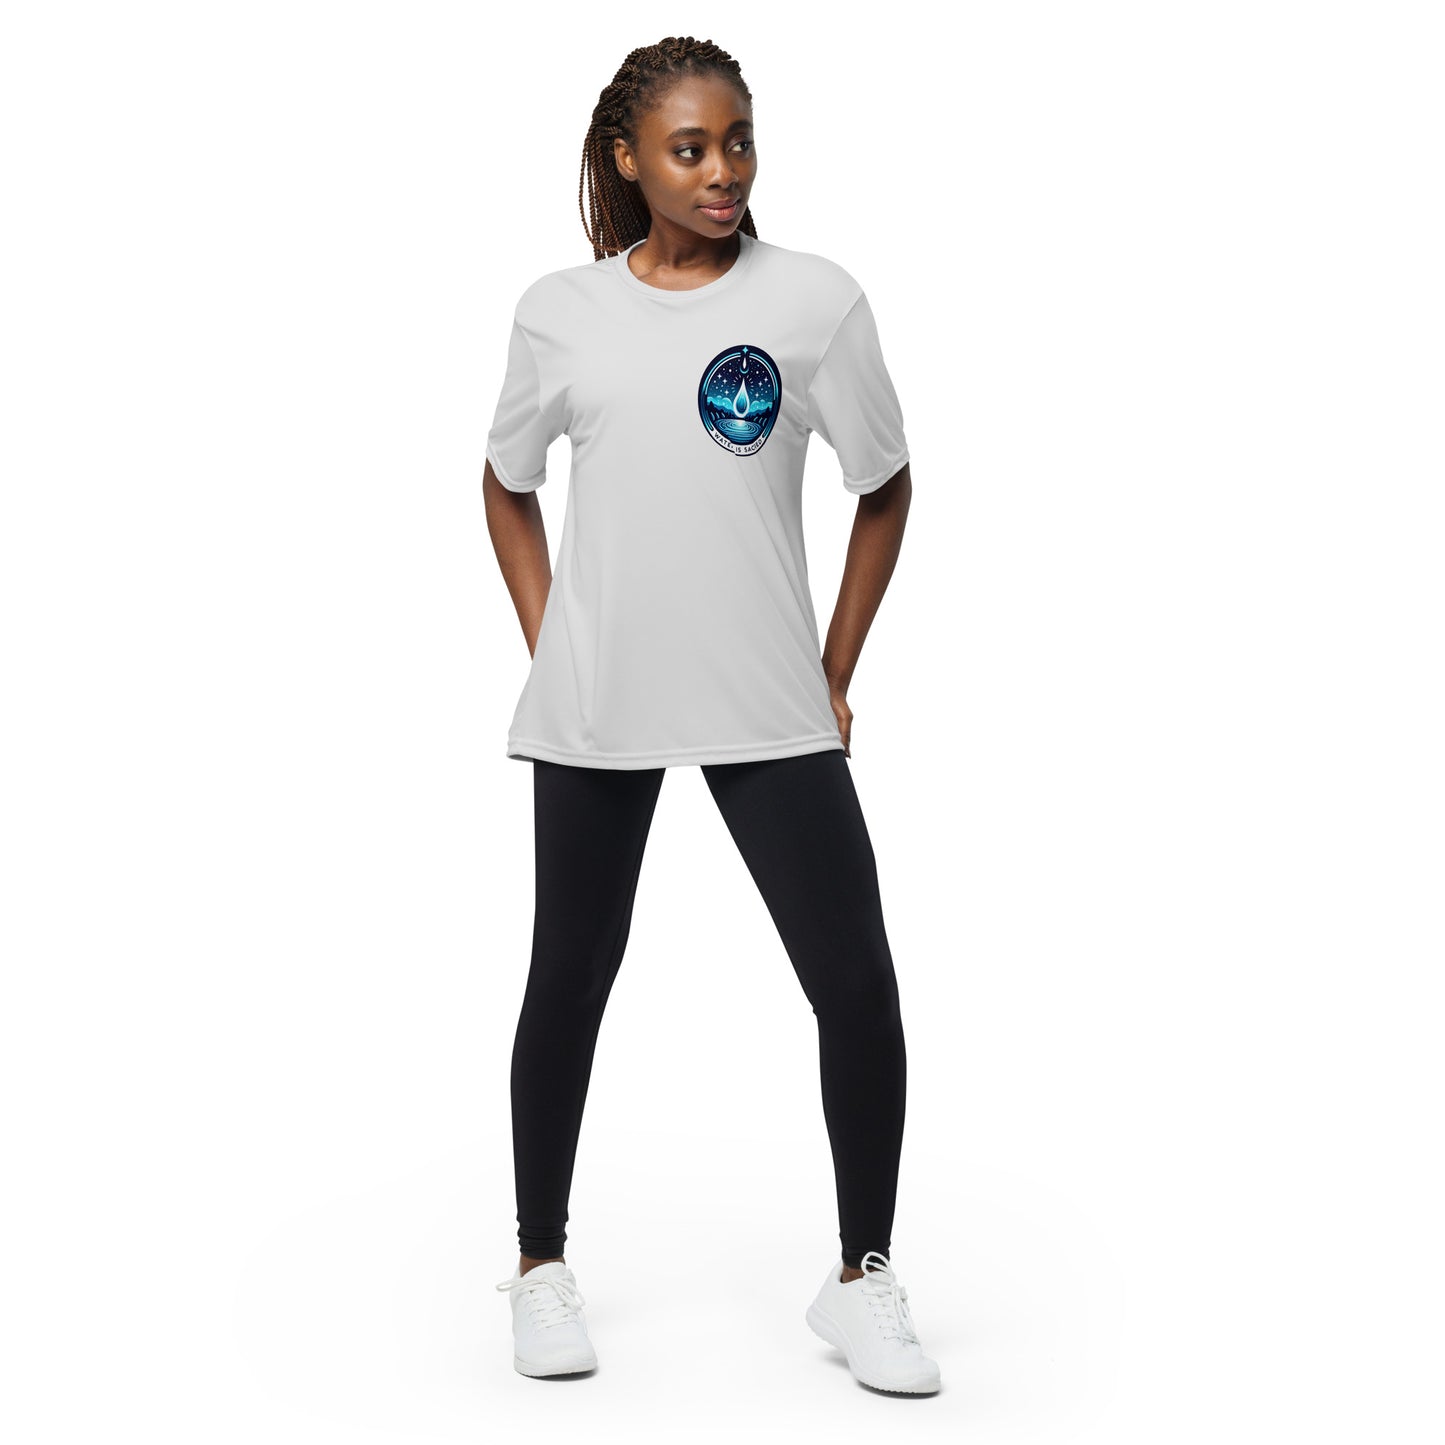 Water is Sacred- Unisex performance crew neck t-shirt